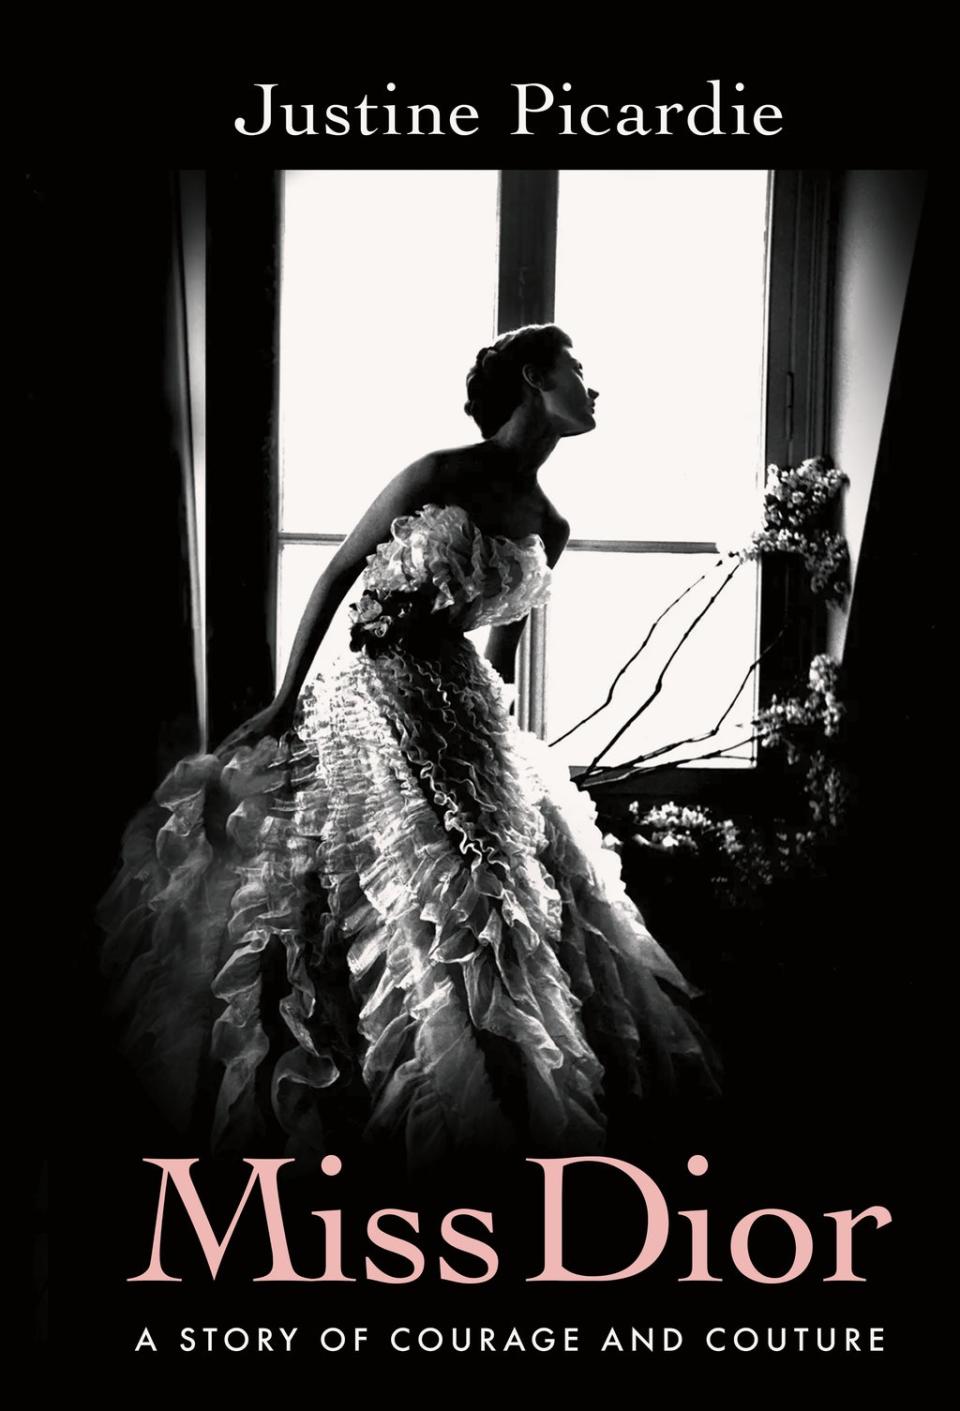 Justine Picardie is the author of ‘Miss Dior: A Story of Courage and Couture' (Farrar, Straus and Giroux)